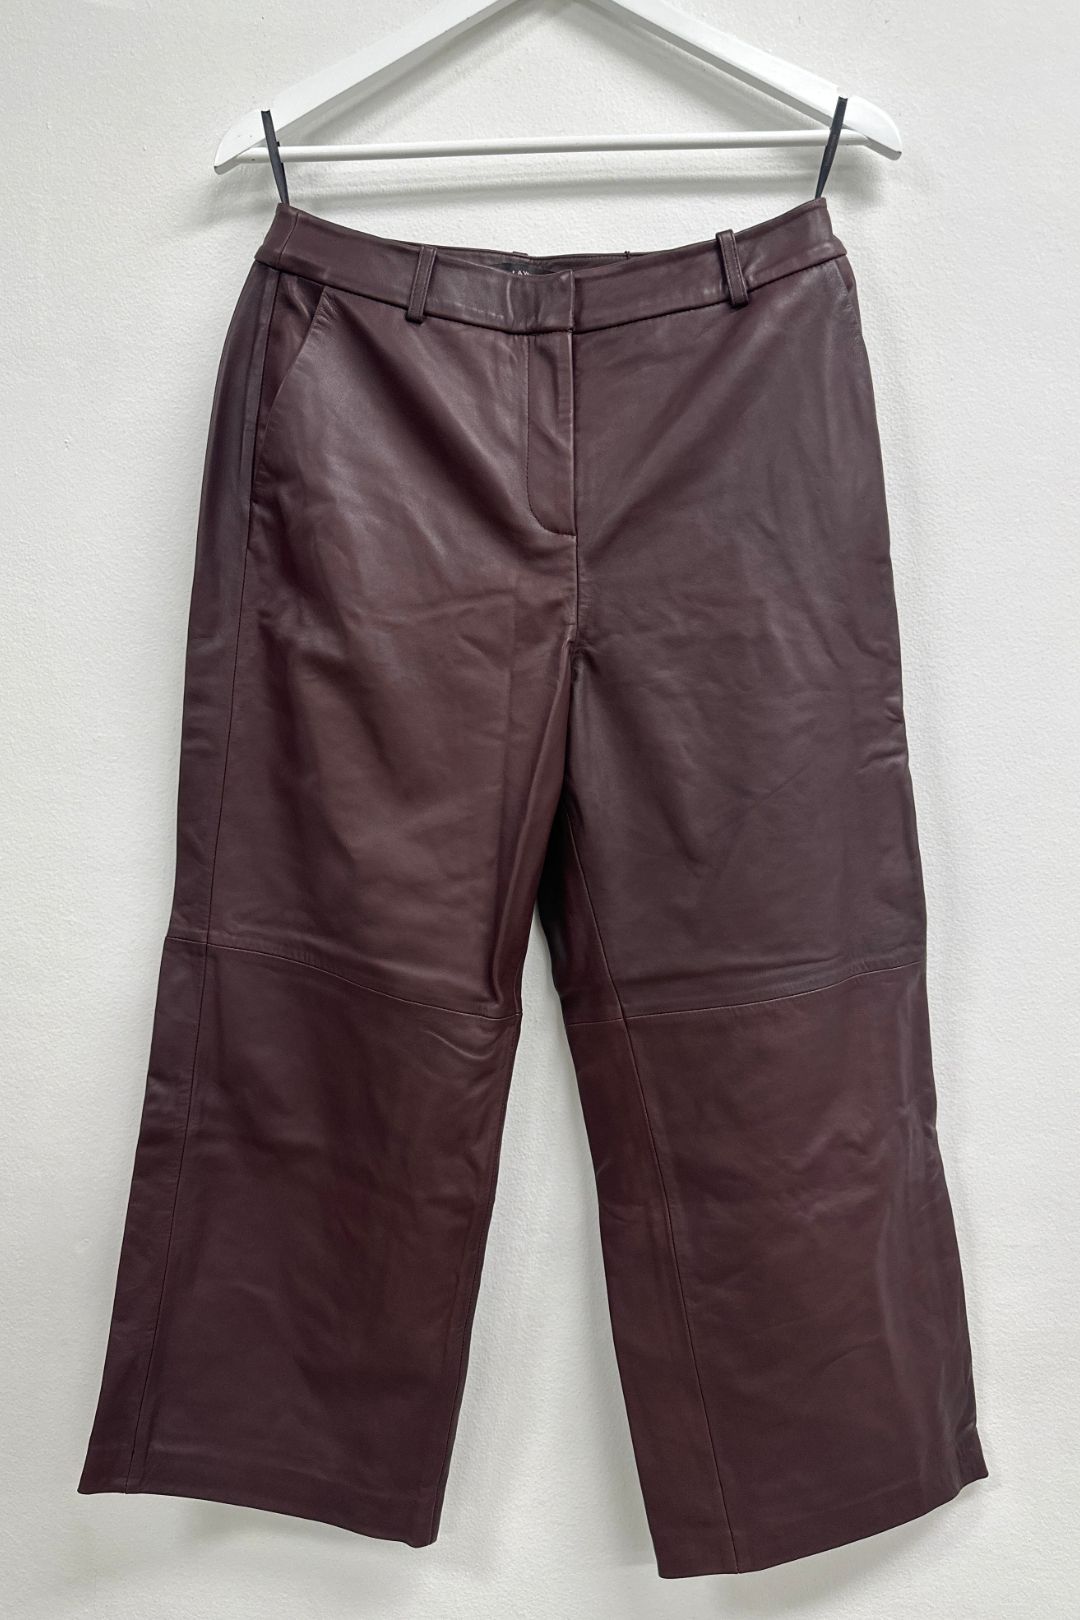 Brown Joey Cropped Leather Pants